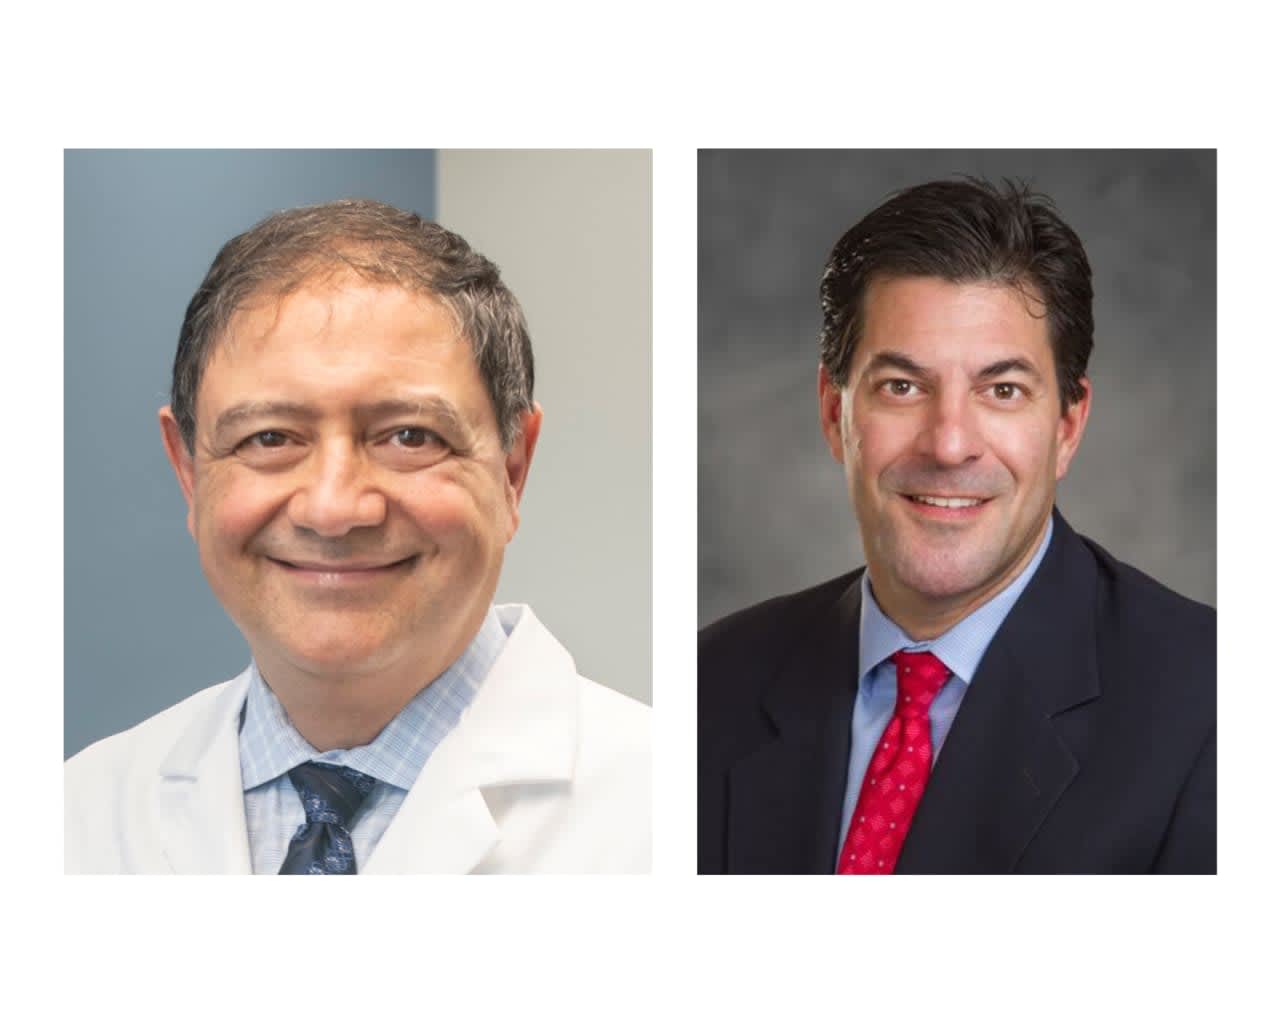 Dr. Victor Khabie, FAAOS, FACS, Co-Director, Orthopedic & Spine Institute, Northern Westchester Hospital and Dr. Evan Karas, FAAOS, Co-Director, Orthopedic & Spine Institute, Northern Westchester Hospital